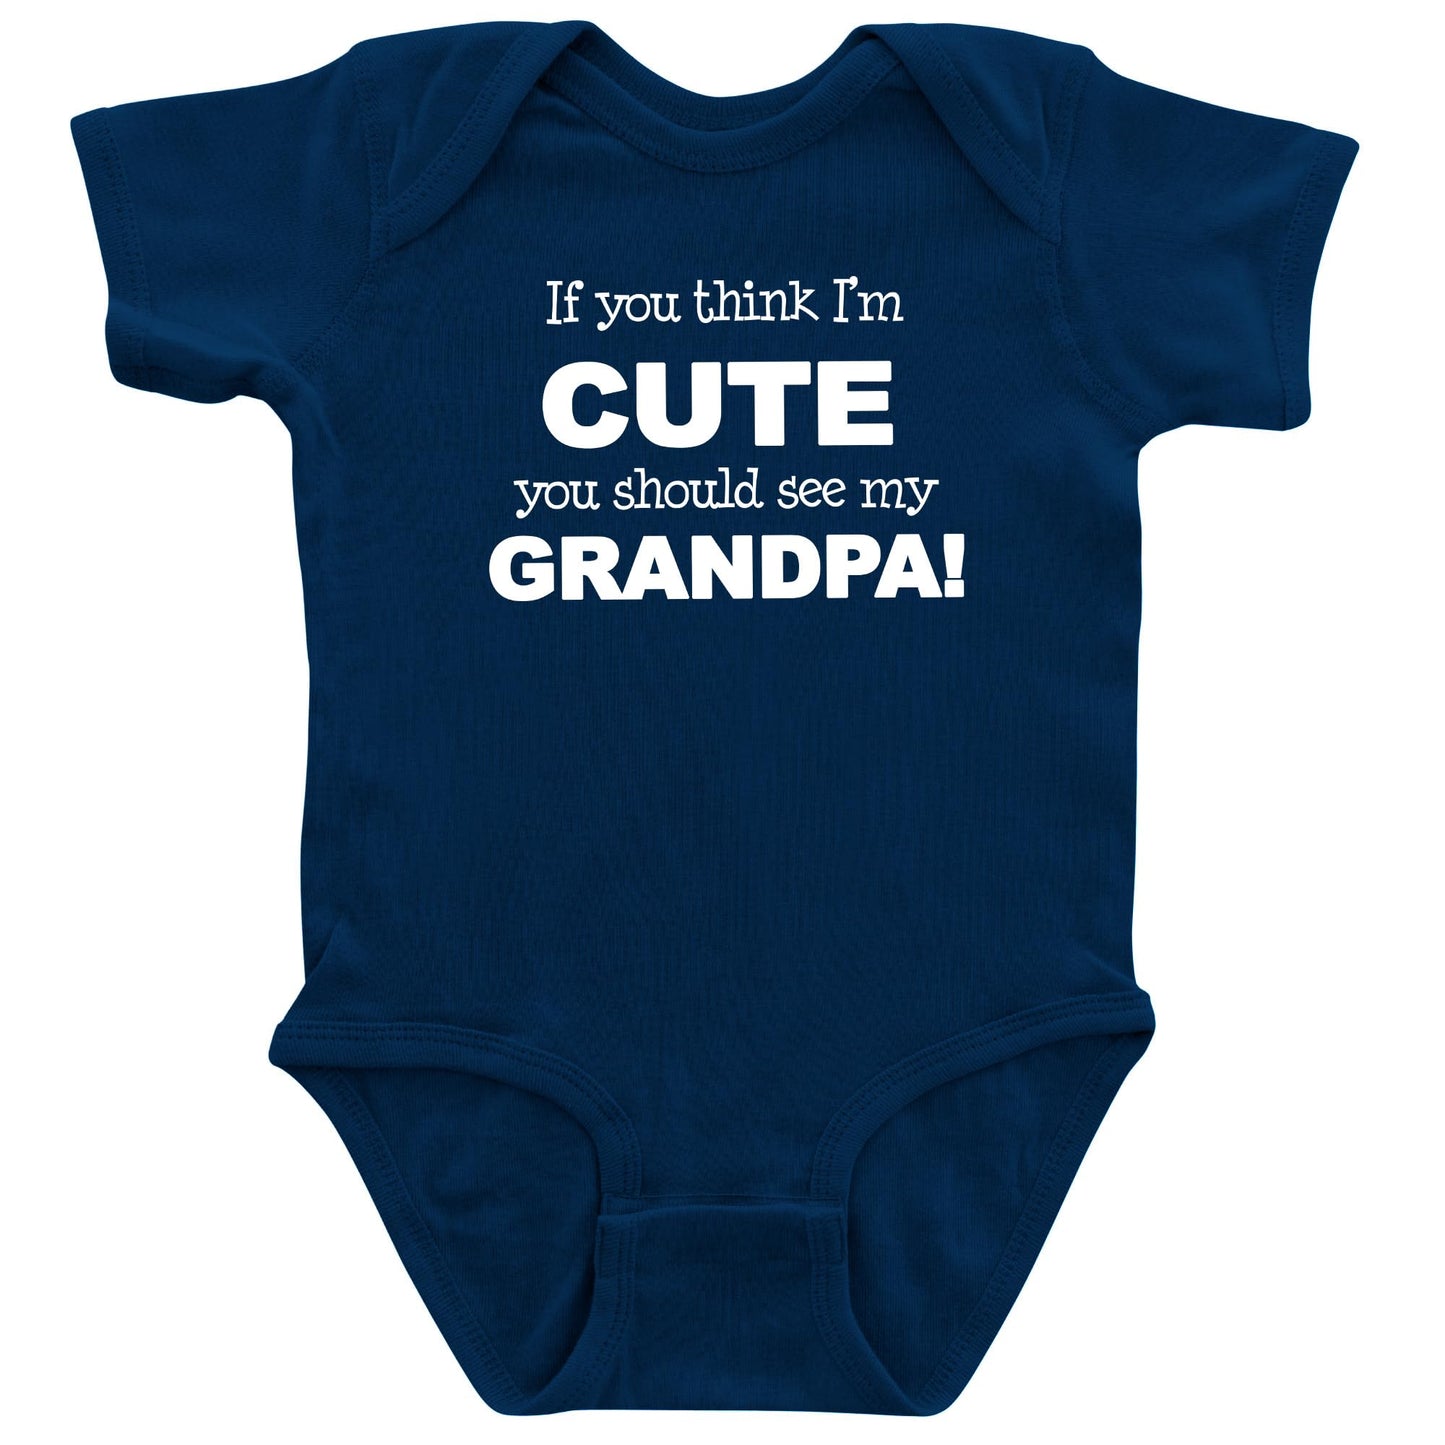 Apericots Cute Baby Short Sleeve Bodysuit, 100% Cotton: If You Think I'm Cute, You Should See My Grandpa (6 months)